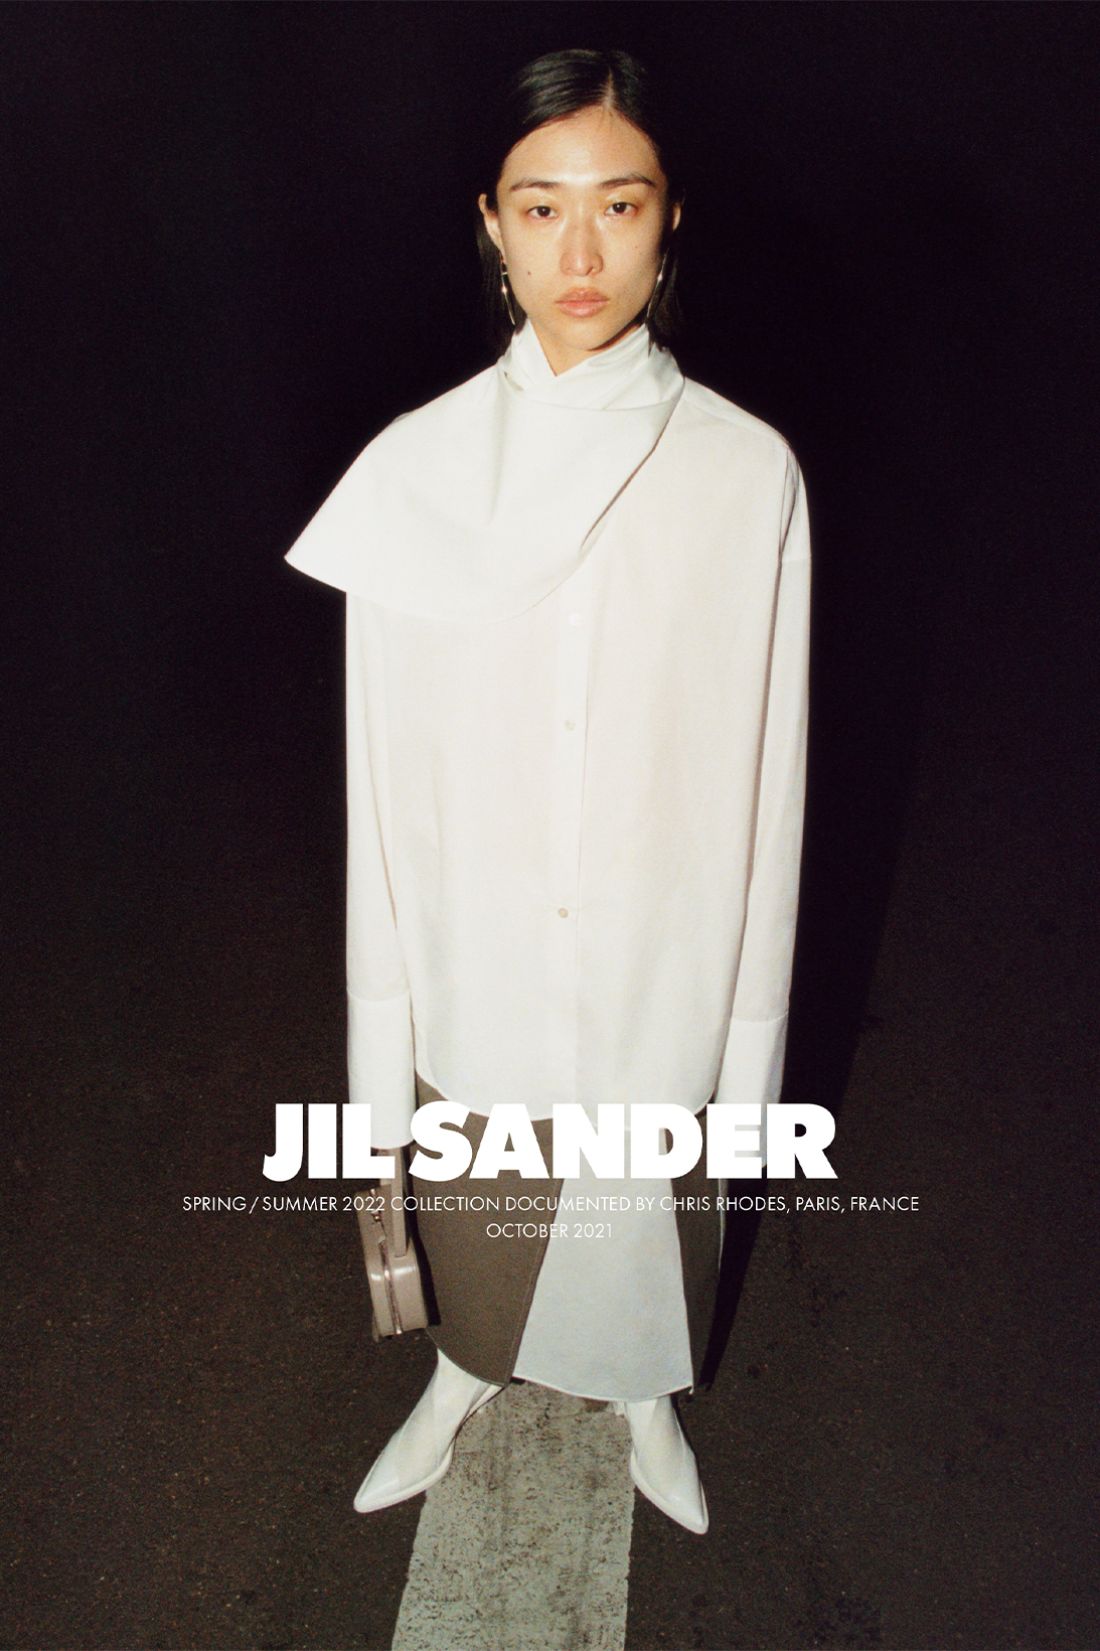 Chu Wong by Chris Rhodes for Jil Sander Spring-Summer 2022 Ad Campaign